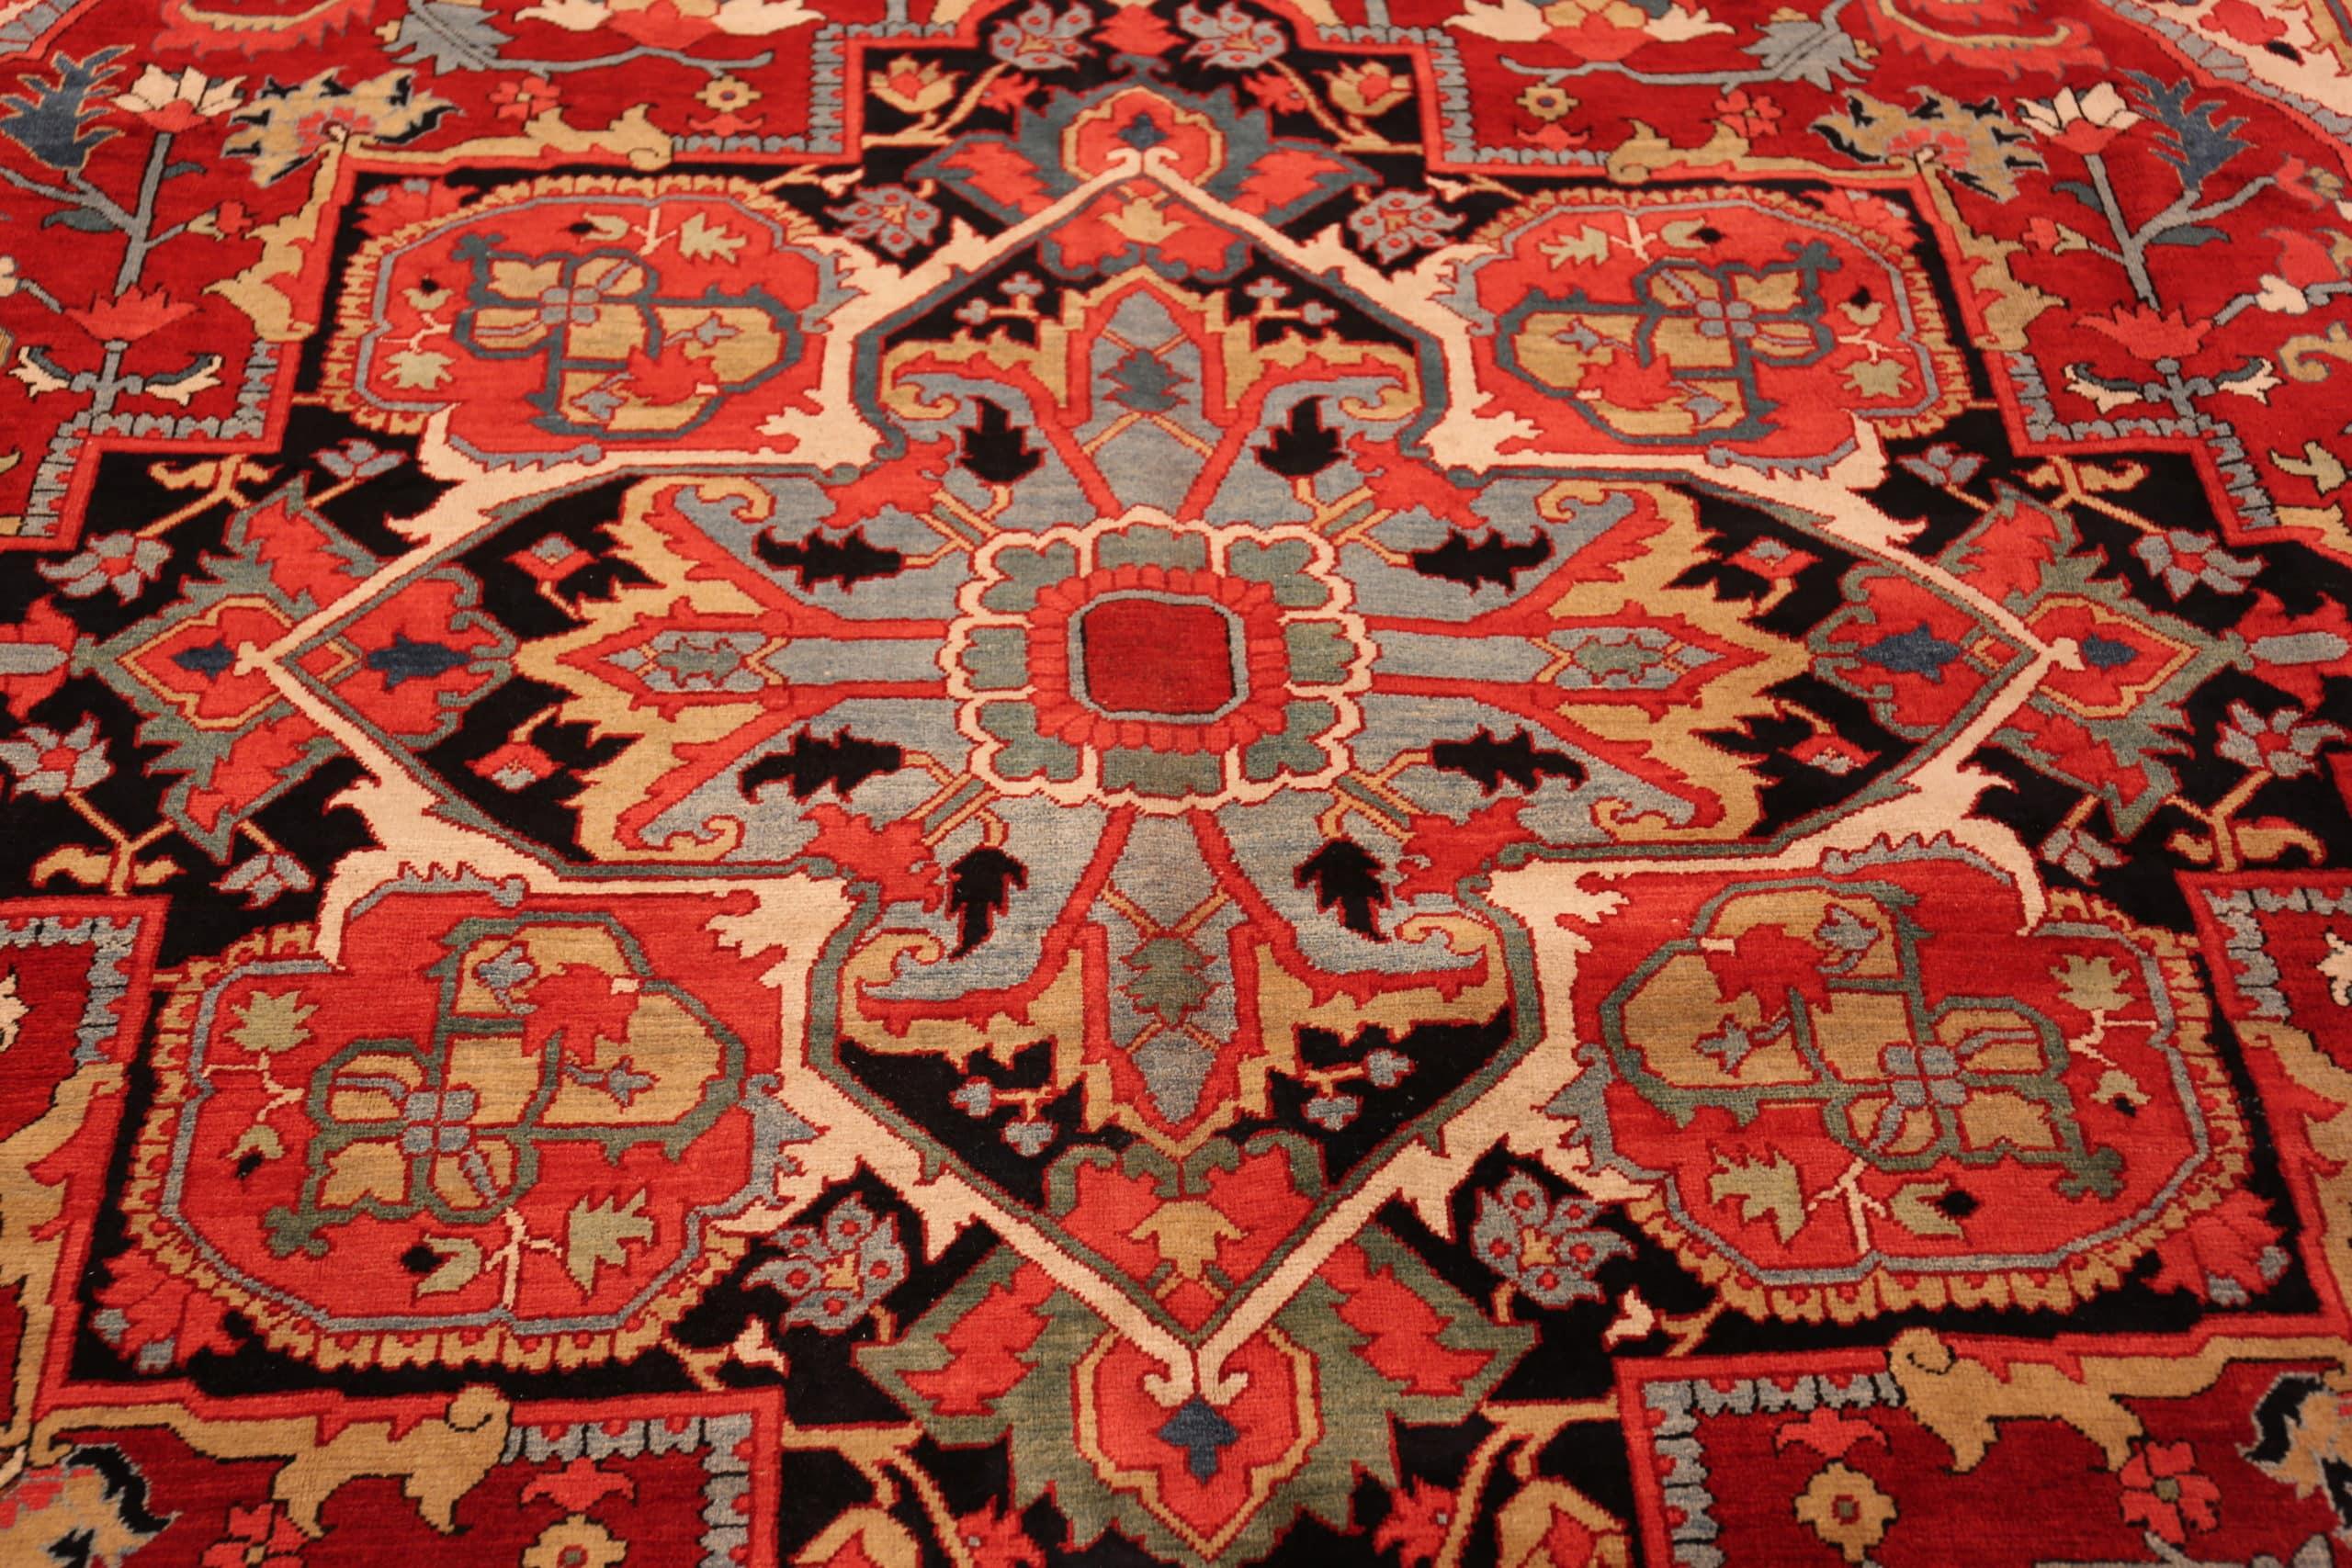 Antique Persian Heriz Rug, Country of Origin / rug type: Persian Rugs, Circa date: 1920. Size: 9 ft 8 in x 12 ft (2.94 m x 3.65 m)
  